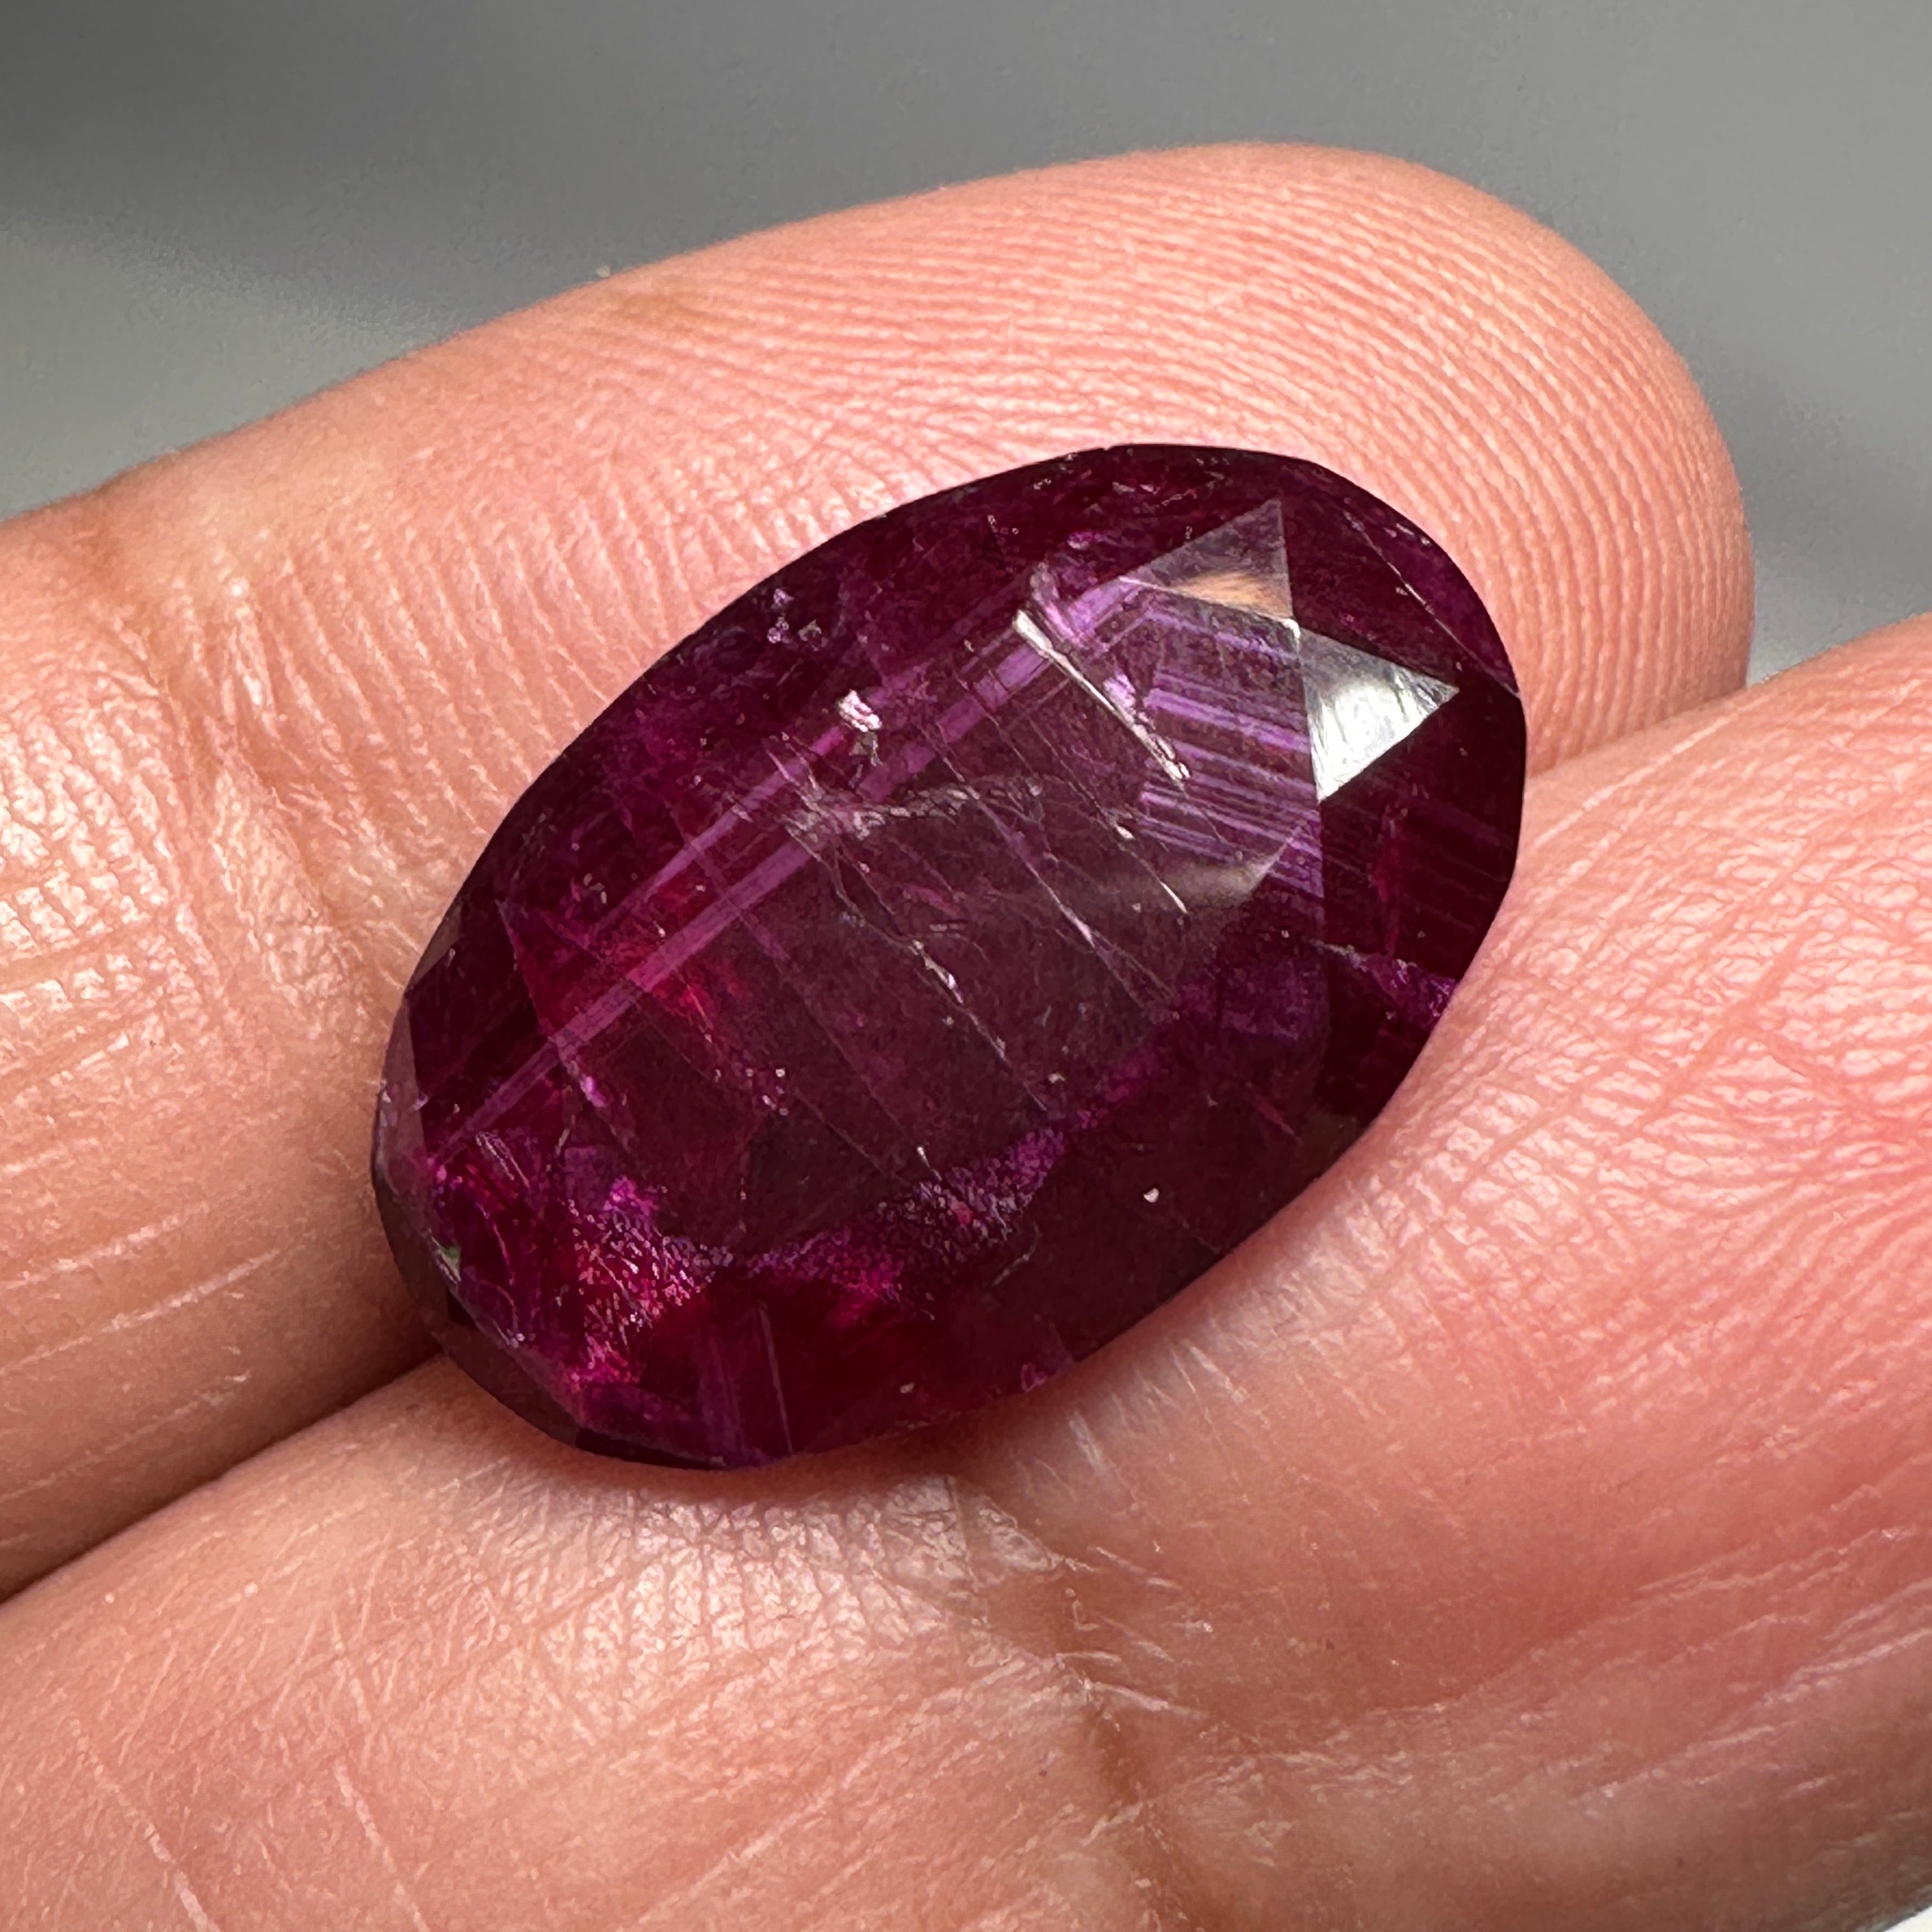 11.37ct Ruby, Longido, Tanzania, Untreated Unheated. Opaque but colour is out of this world